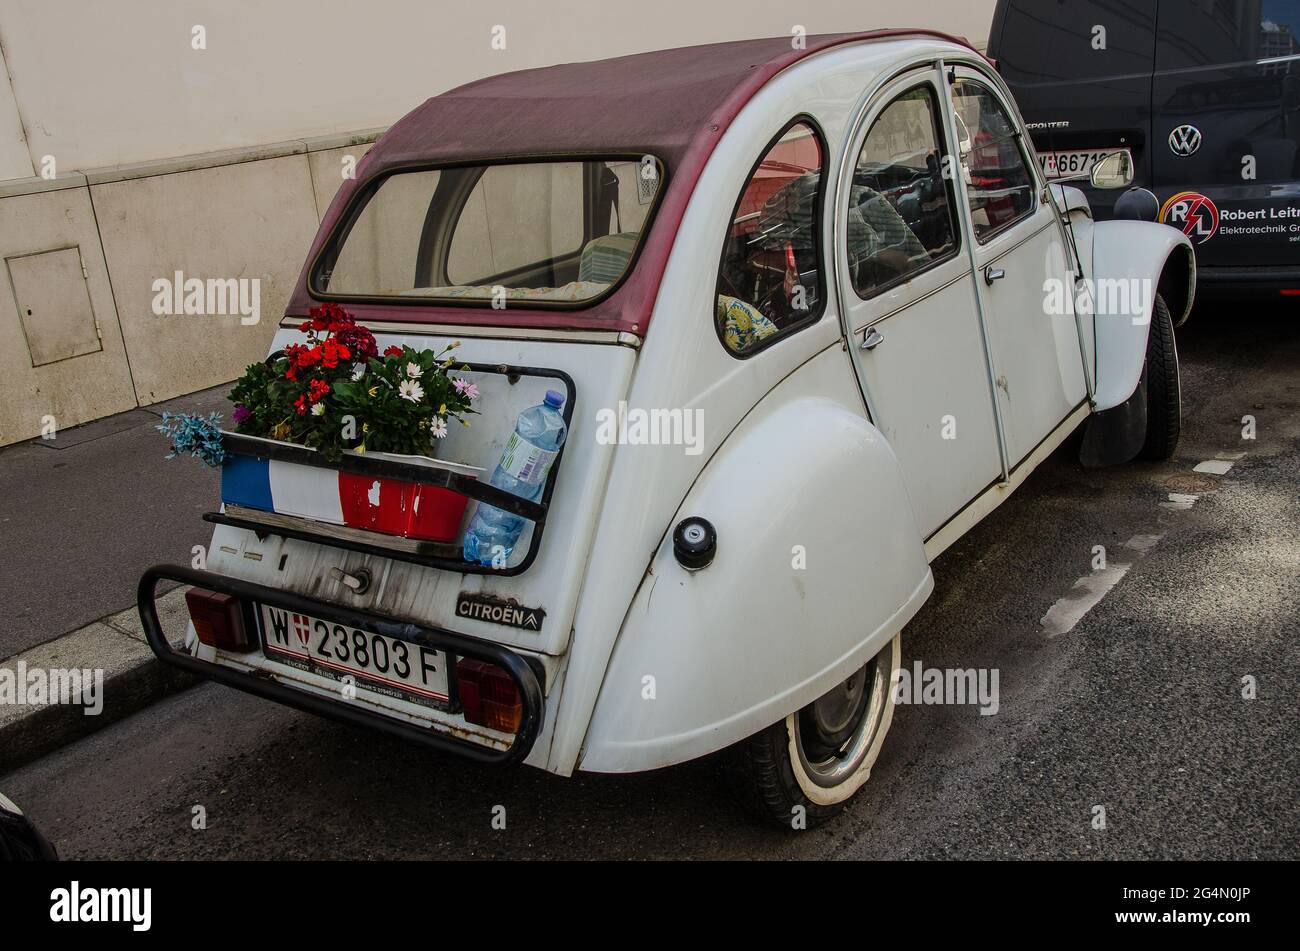 Citroën 2CV or deux chevaux or deux chevaux-vapeur, lit. 'two steam horses', is an air-cooled front-engine, front-wheel-drive, economy family car. Stock Photo